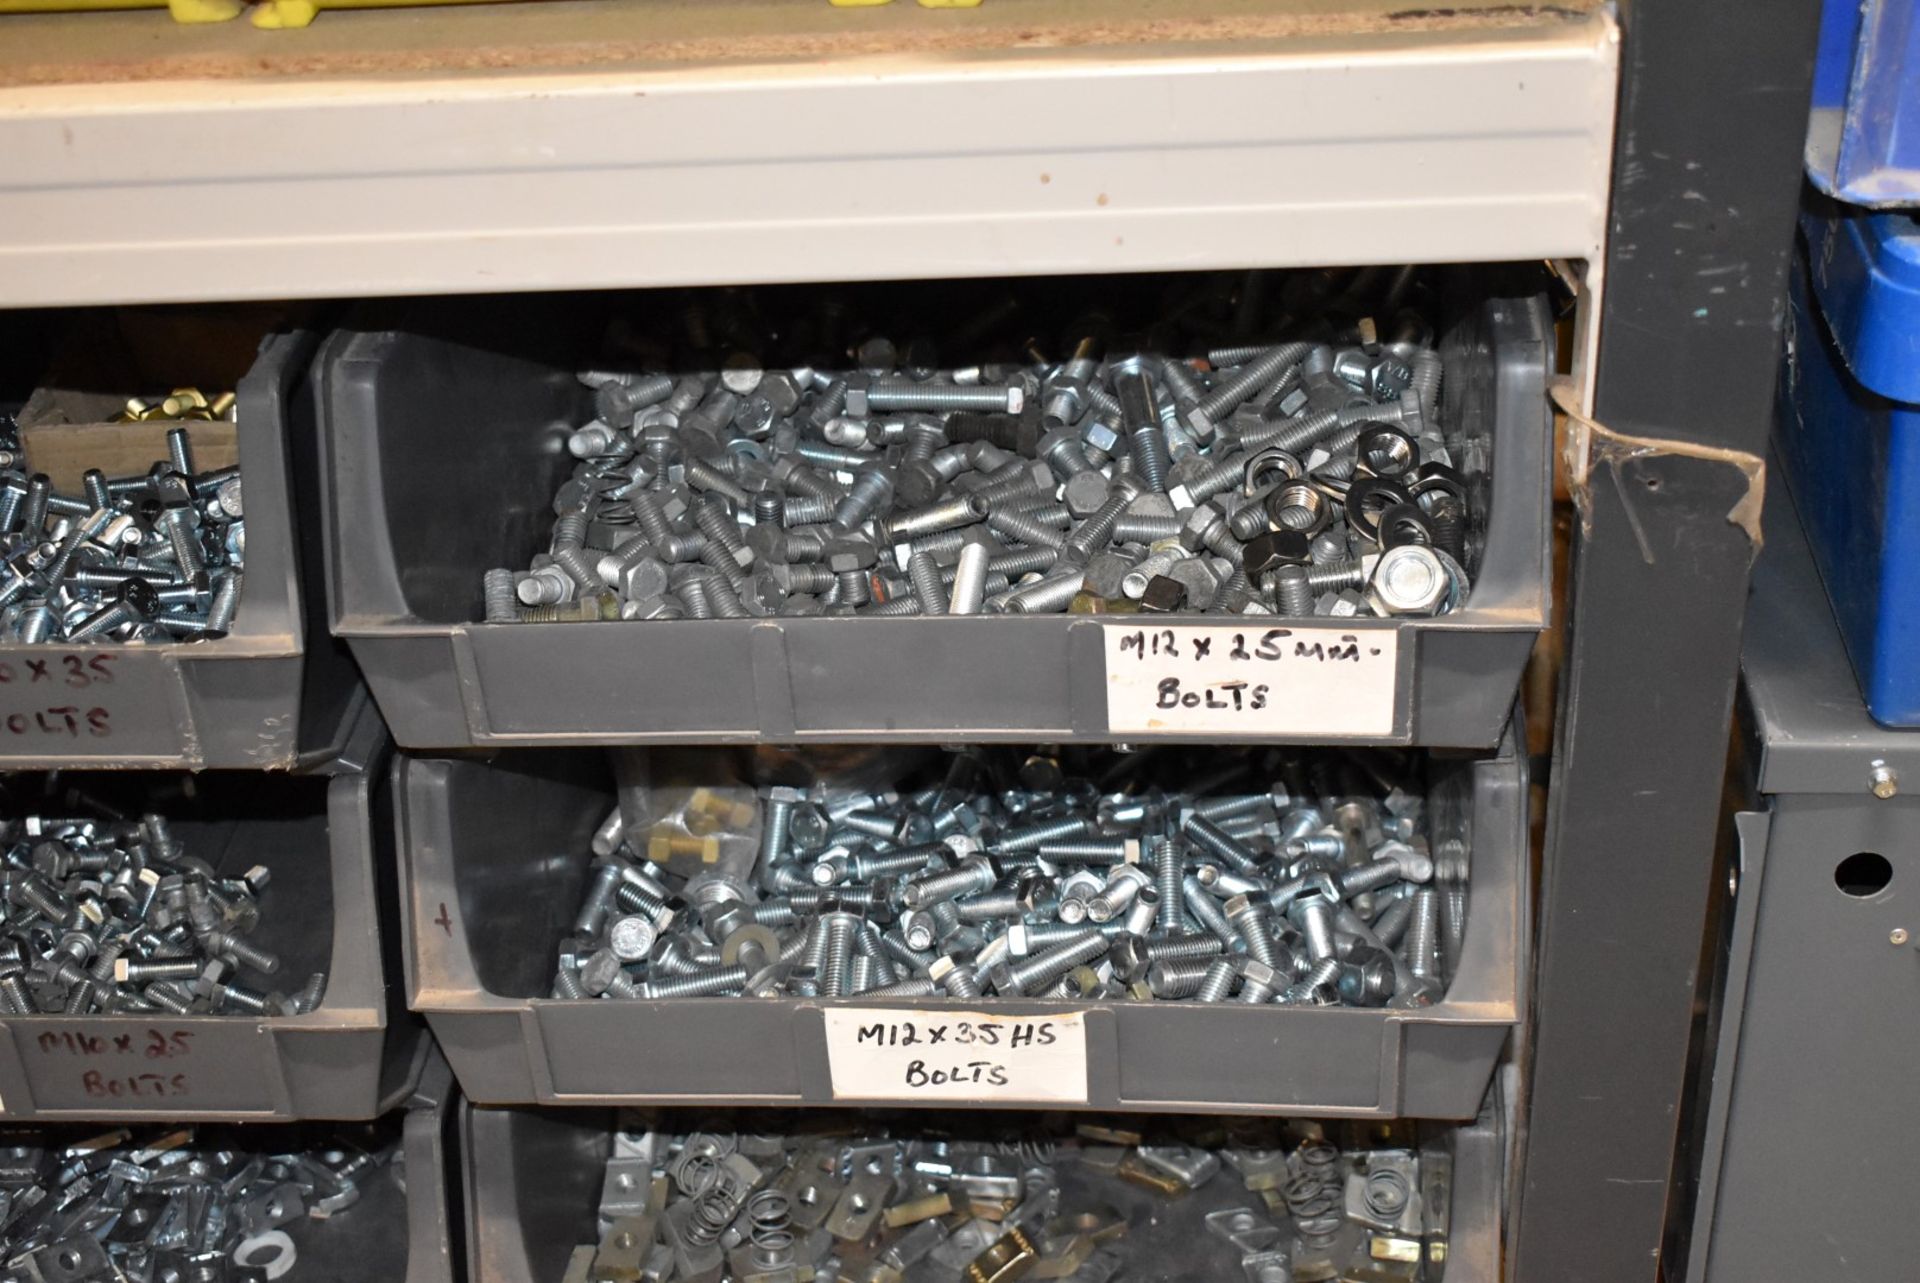 20 x Large Linbins With Contents - Various Bolts, Zebs, Hex Nuts, T Brackets, Angle Brackets & More! - Image 2 of 16